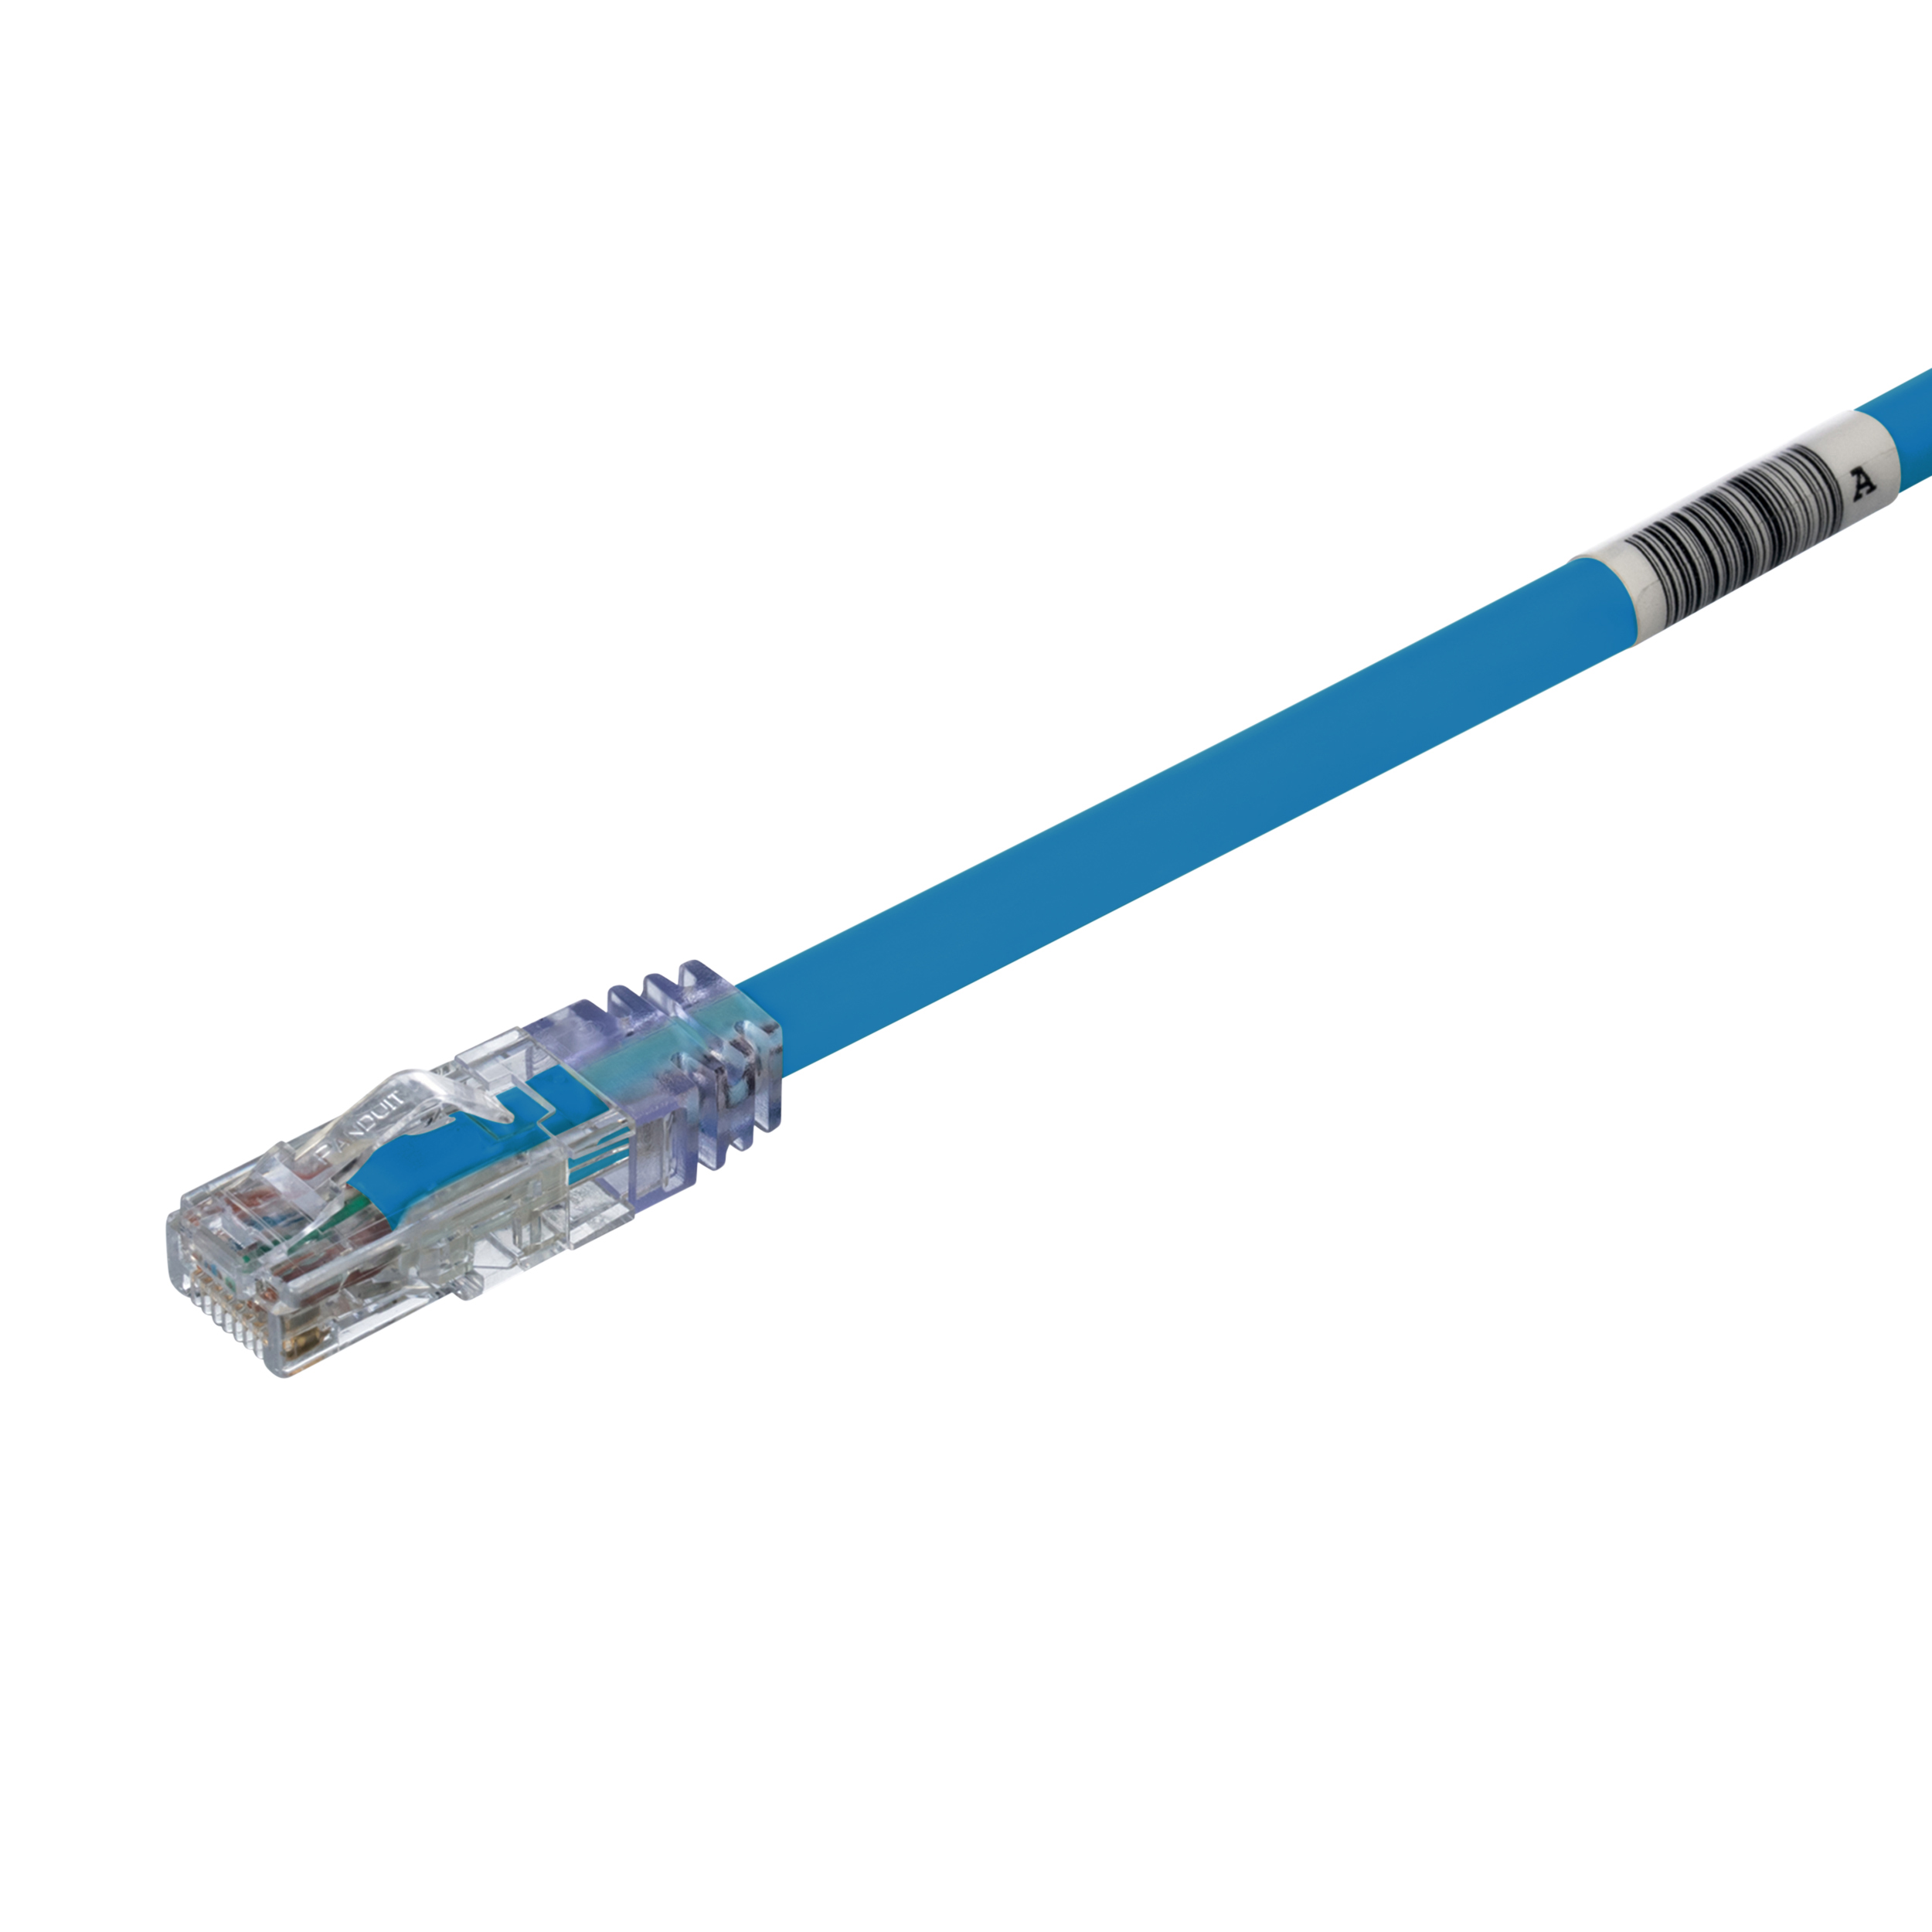 Cat 6A 24 AWG UTP Copper Patch Cord, 10 ft, Blue